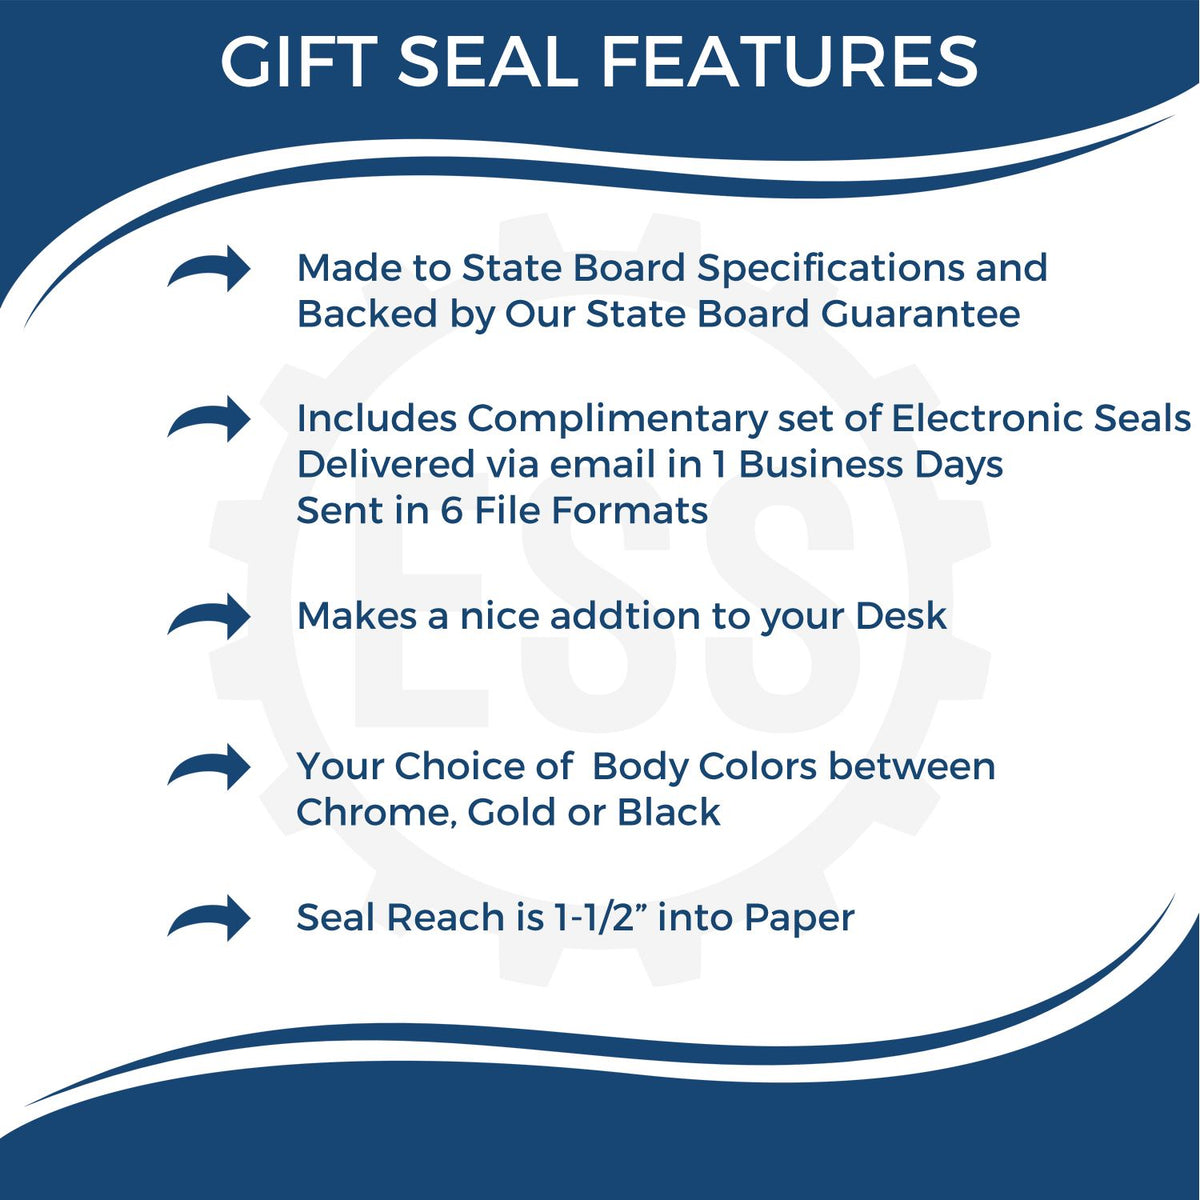 A picture of an infographic highlighting the selling points for the Gift Florida Geologist Seal